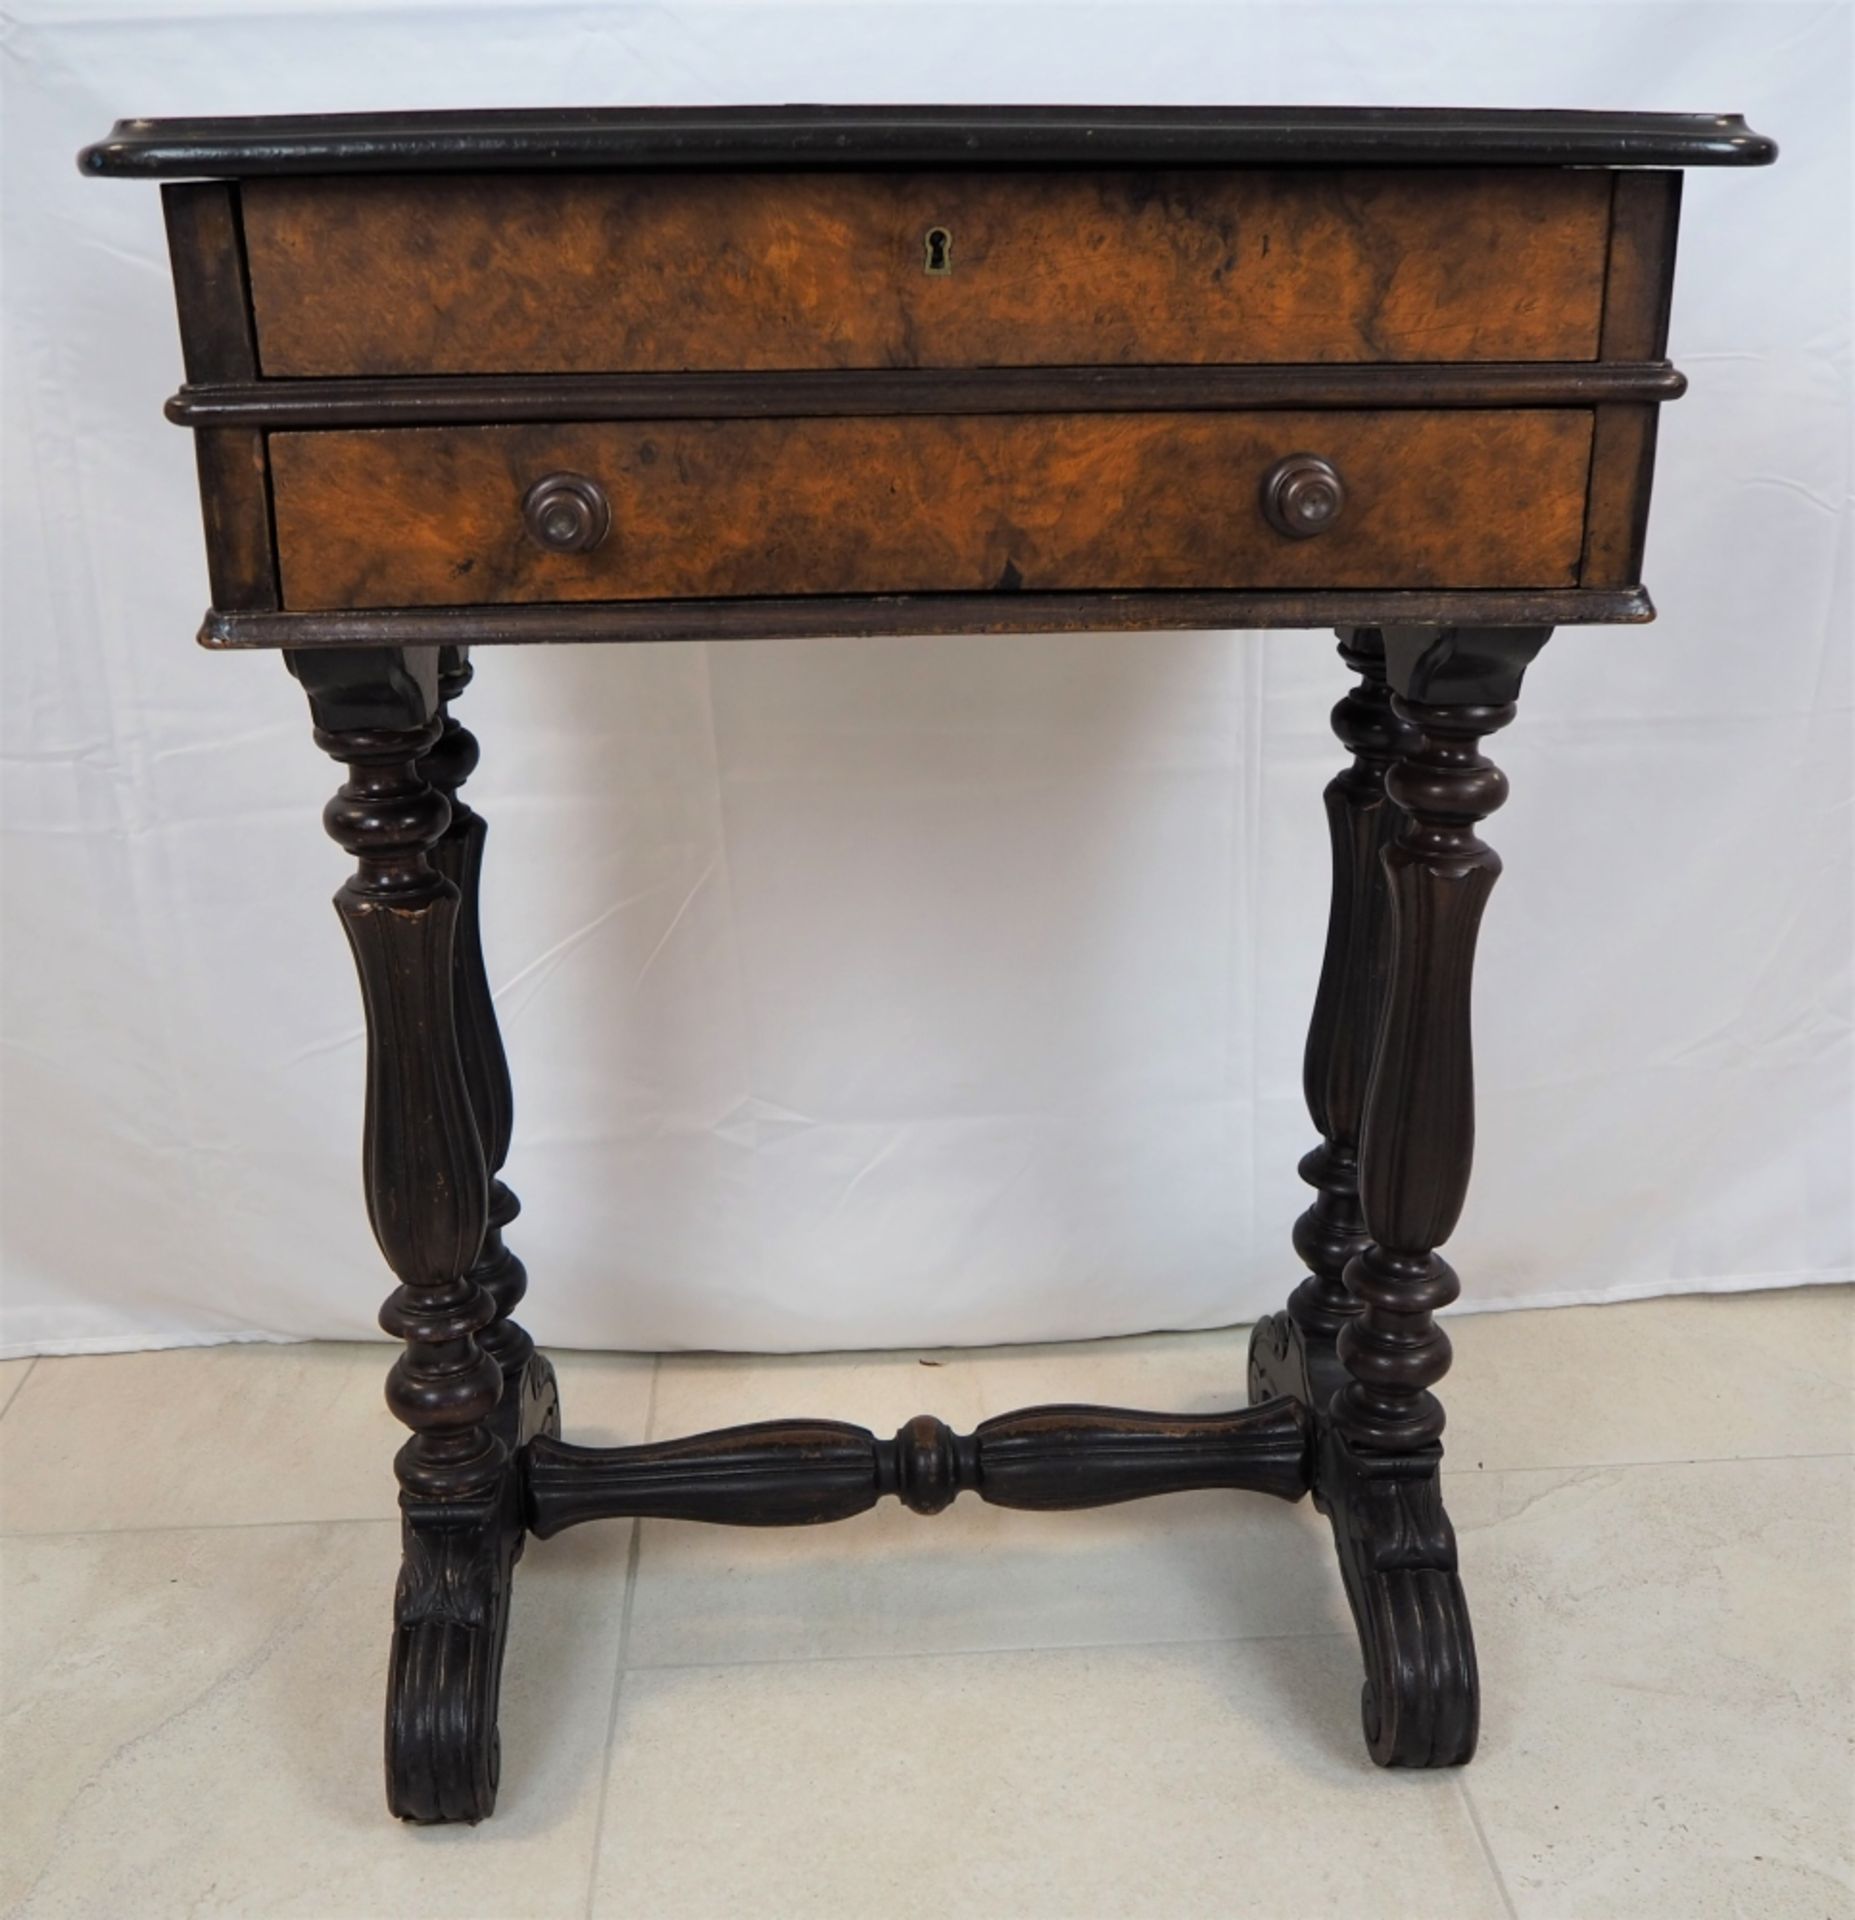 Wilhelminian style sewing table, around 1880 - Image 2 of 4